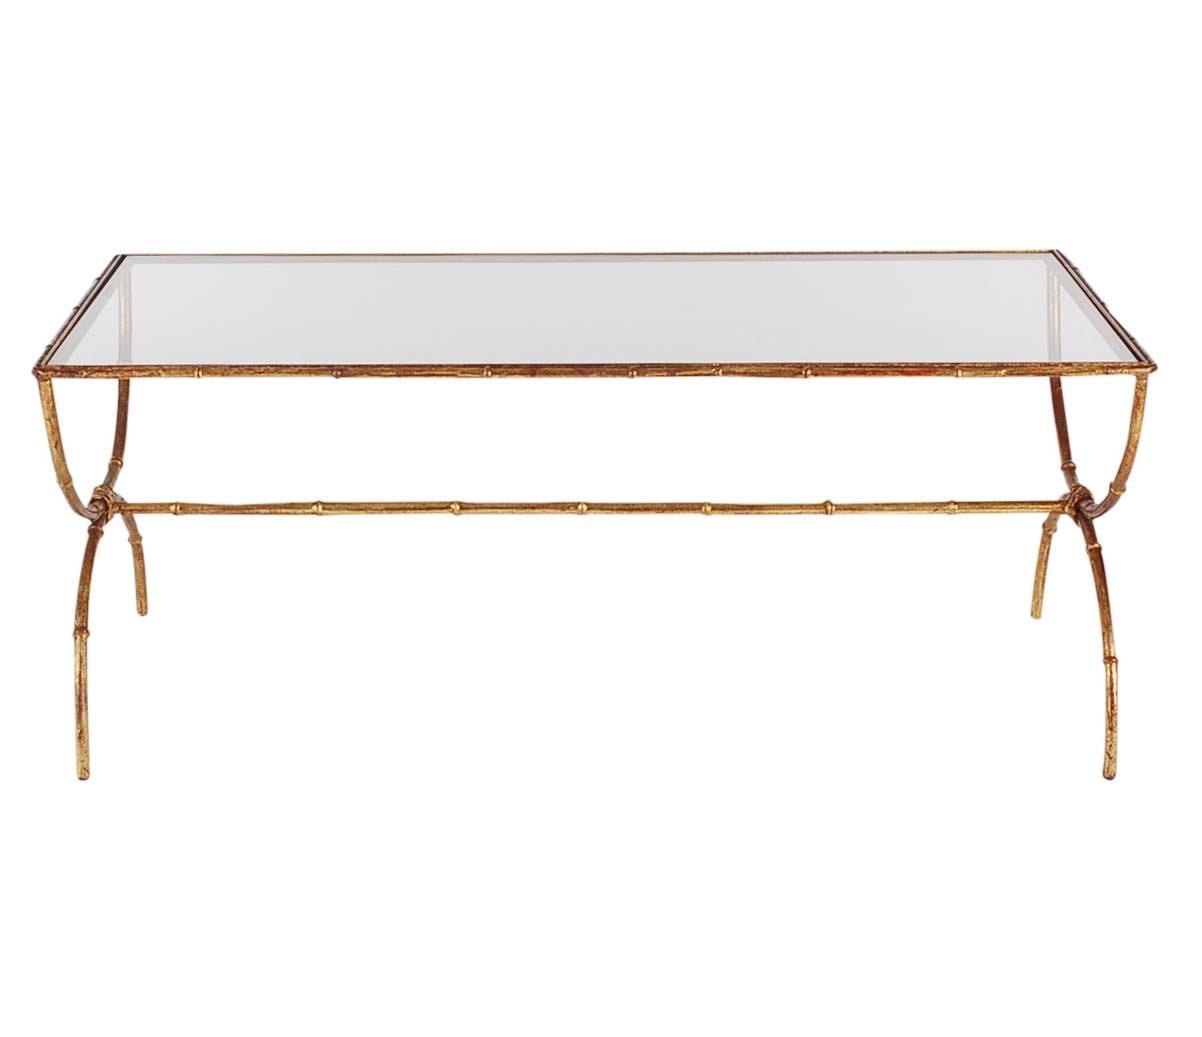 A very handsome thin framed Hollywood Regency coffee table from Italy in the 1960s. It features a gold gilded faux bamboo frame with inlaid clear glass. Very clean and ready for immediate use.